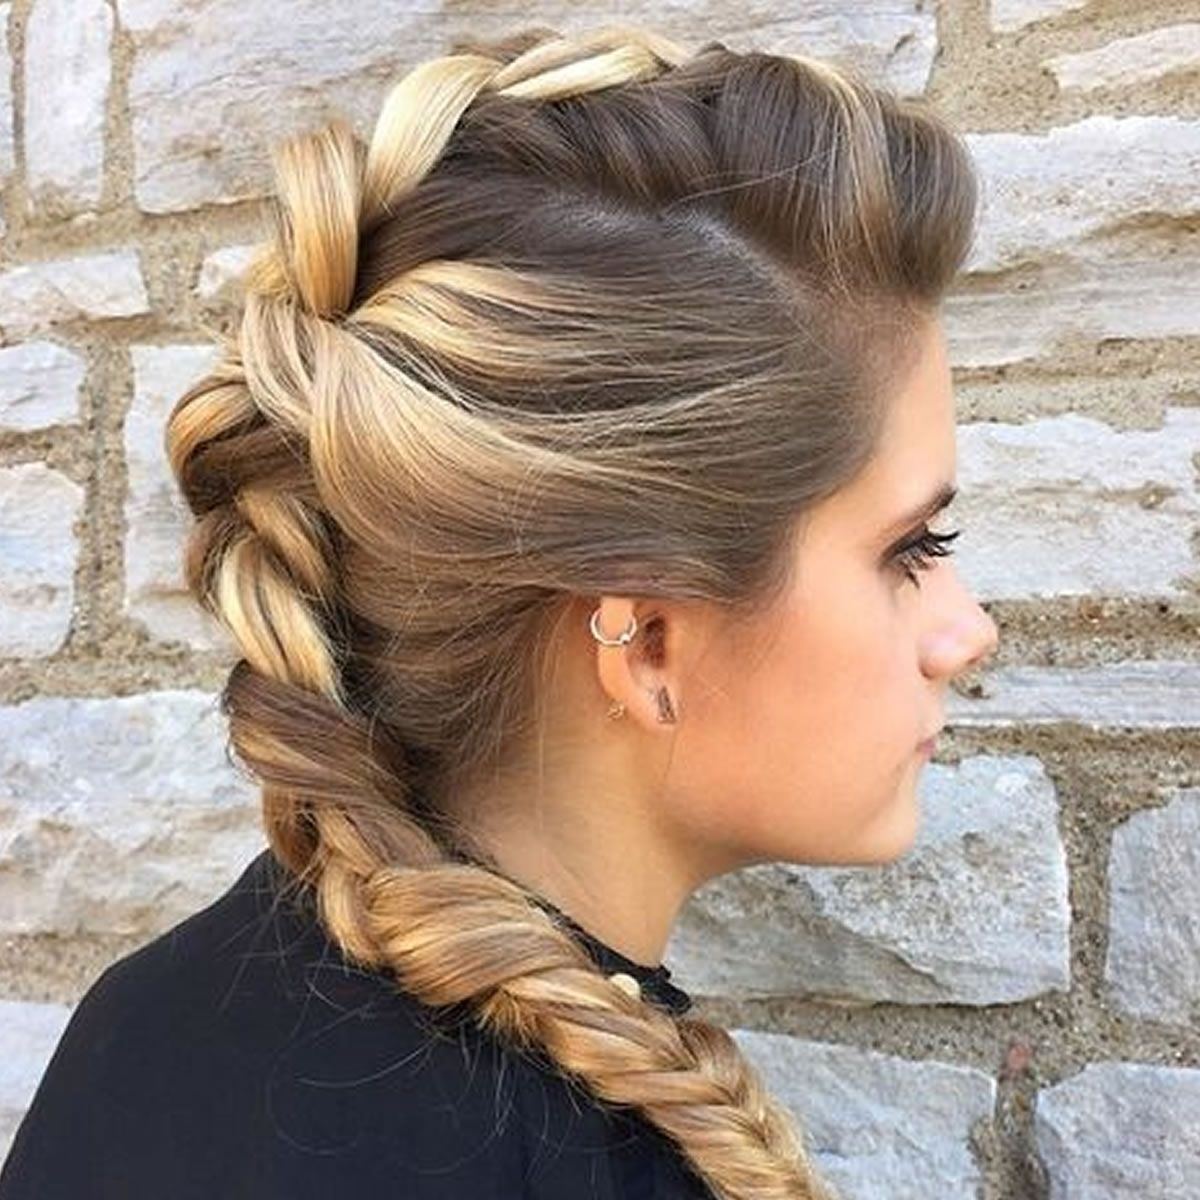 Preferred Mohawk French Braid Hairstyles Throughout French Braid Mohawk Hairstyle For Long Hair – Hairstyles (View 4 of 15)